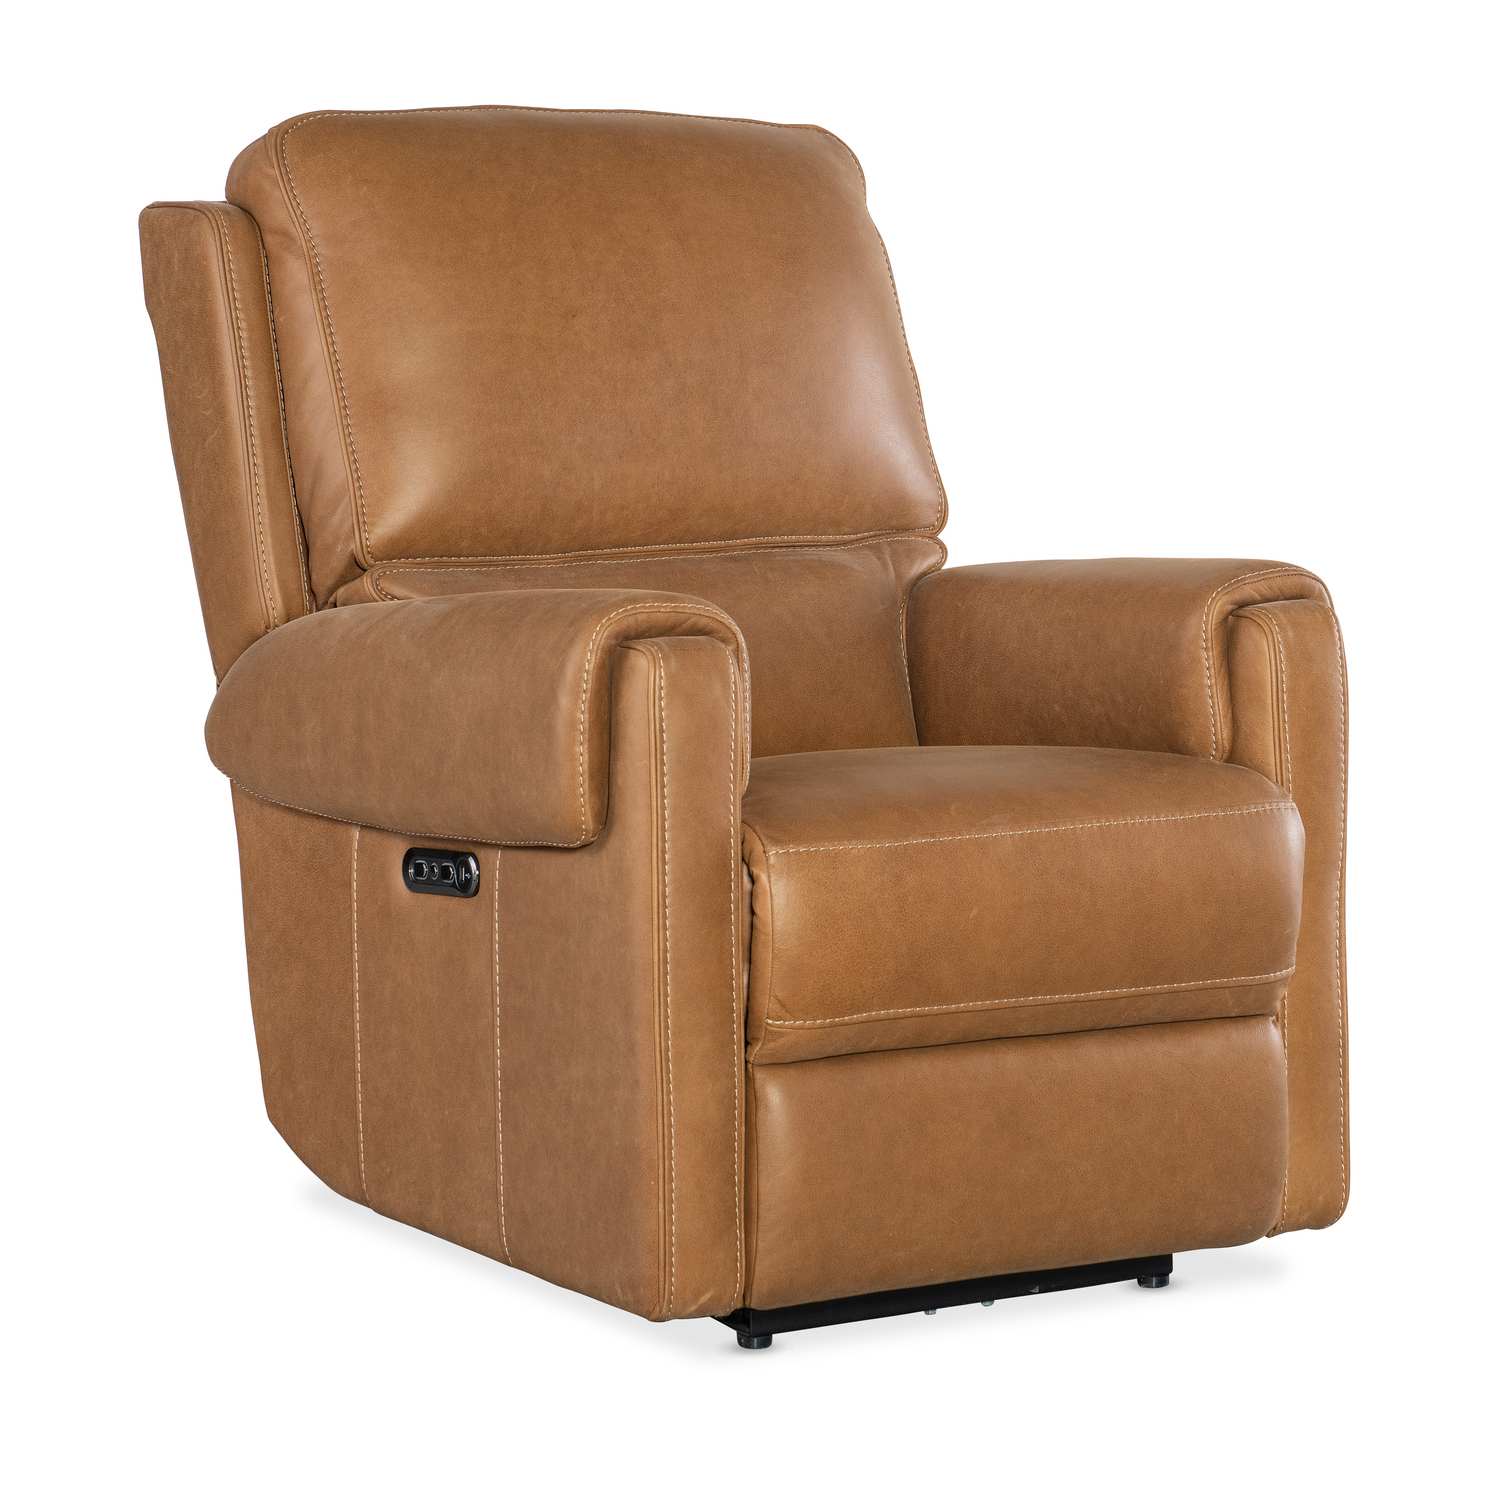 Chairs & Recliners Category